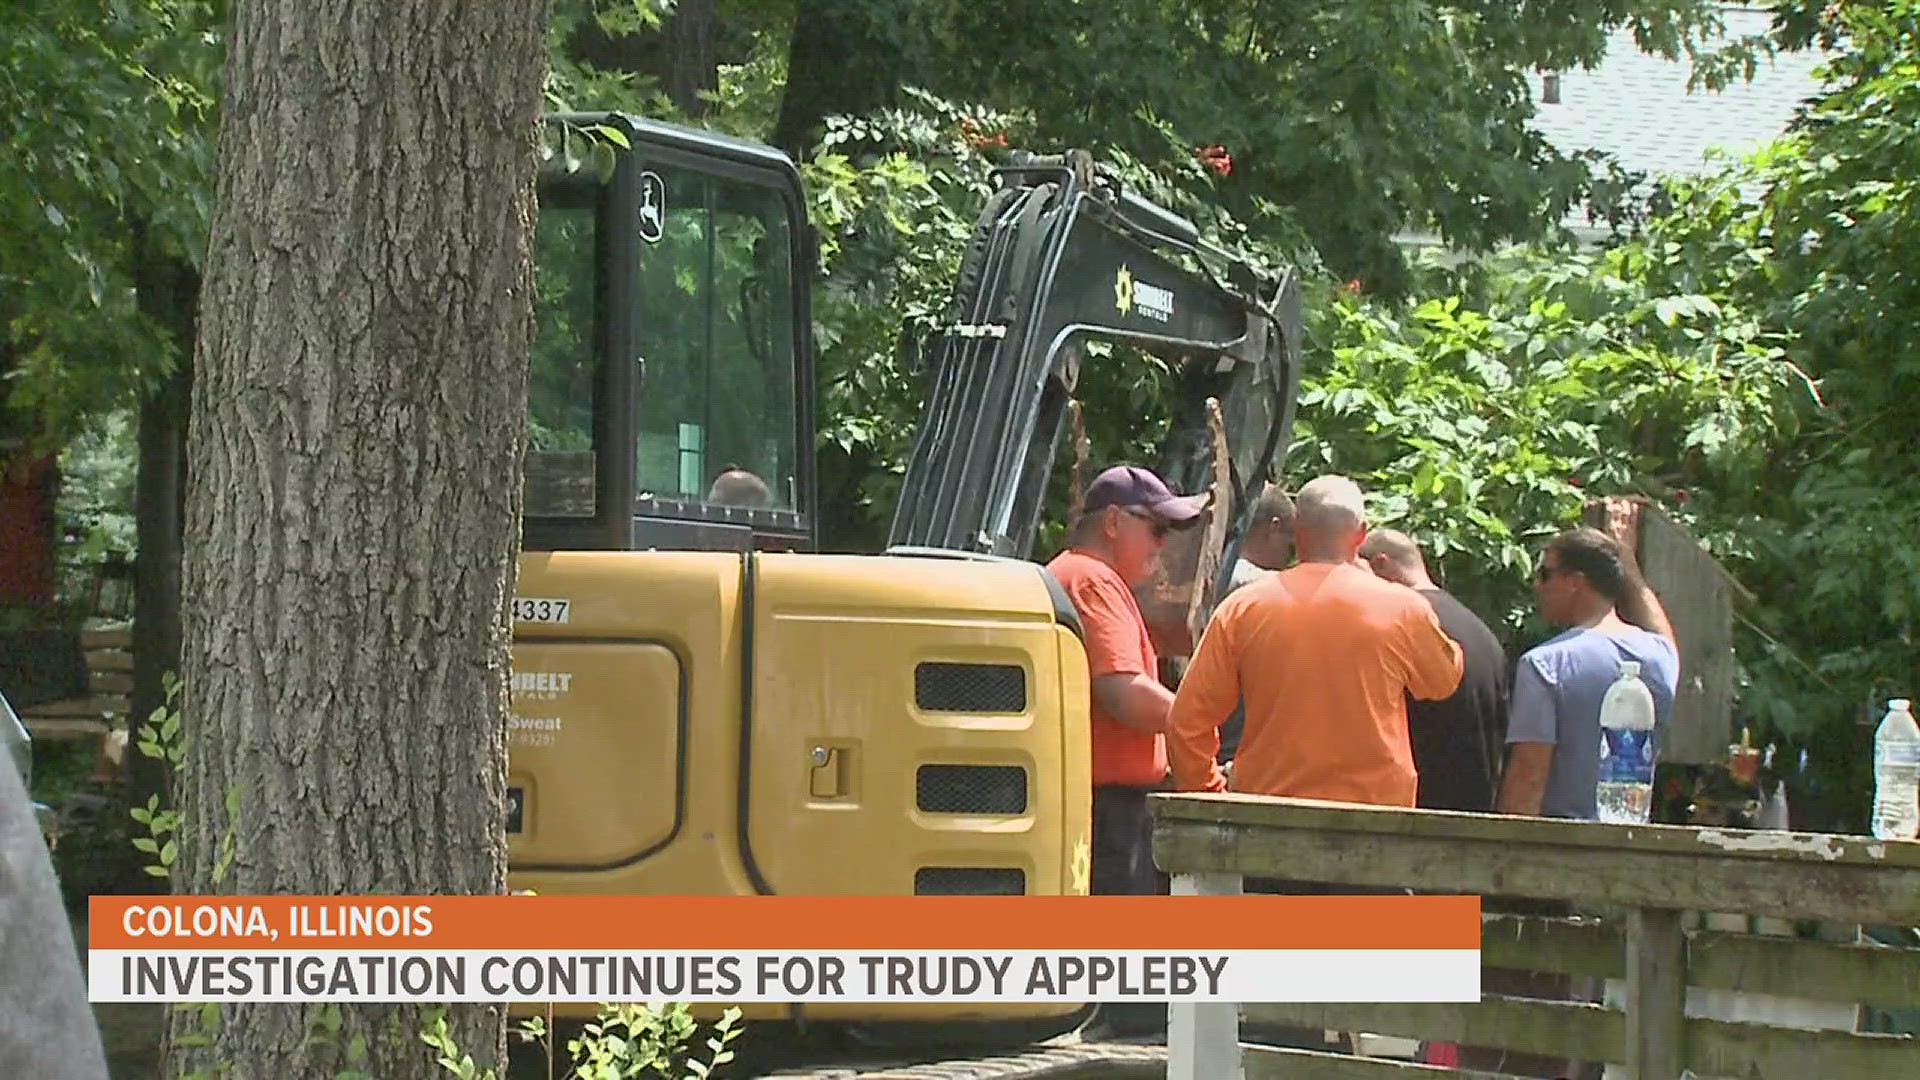 The cold case of Trudy Appleby continues this week as police enacted a search warrant on a property of interest.